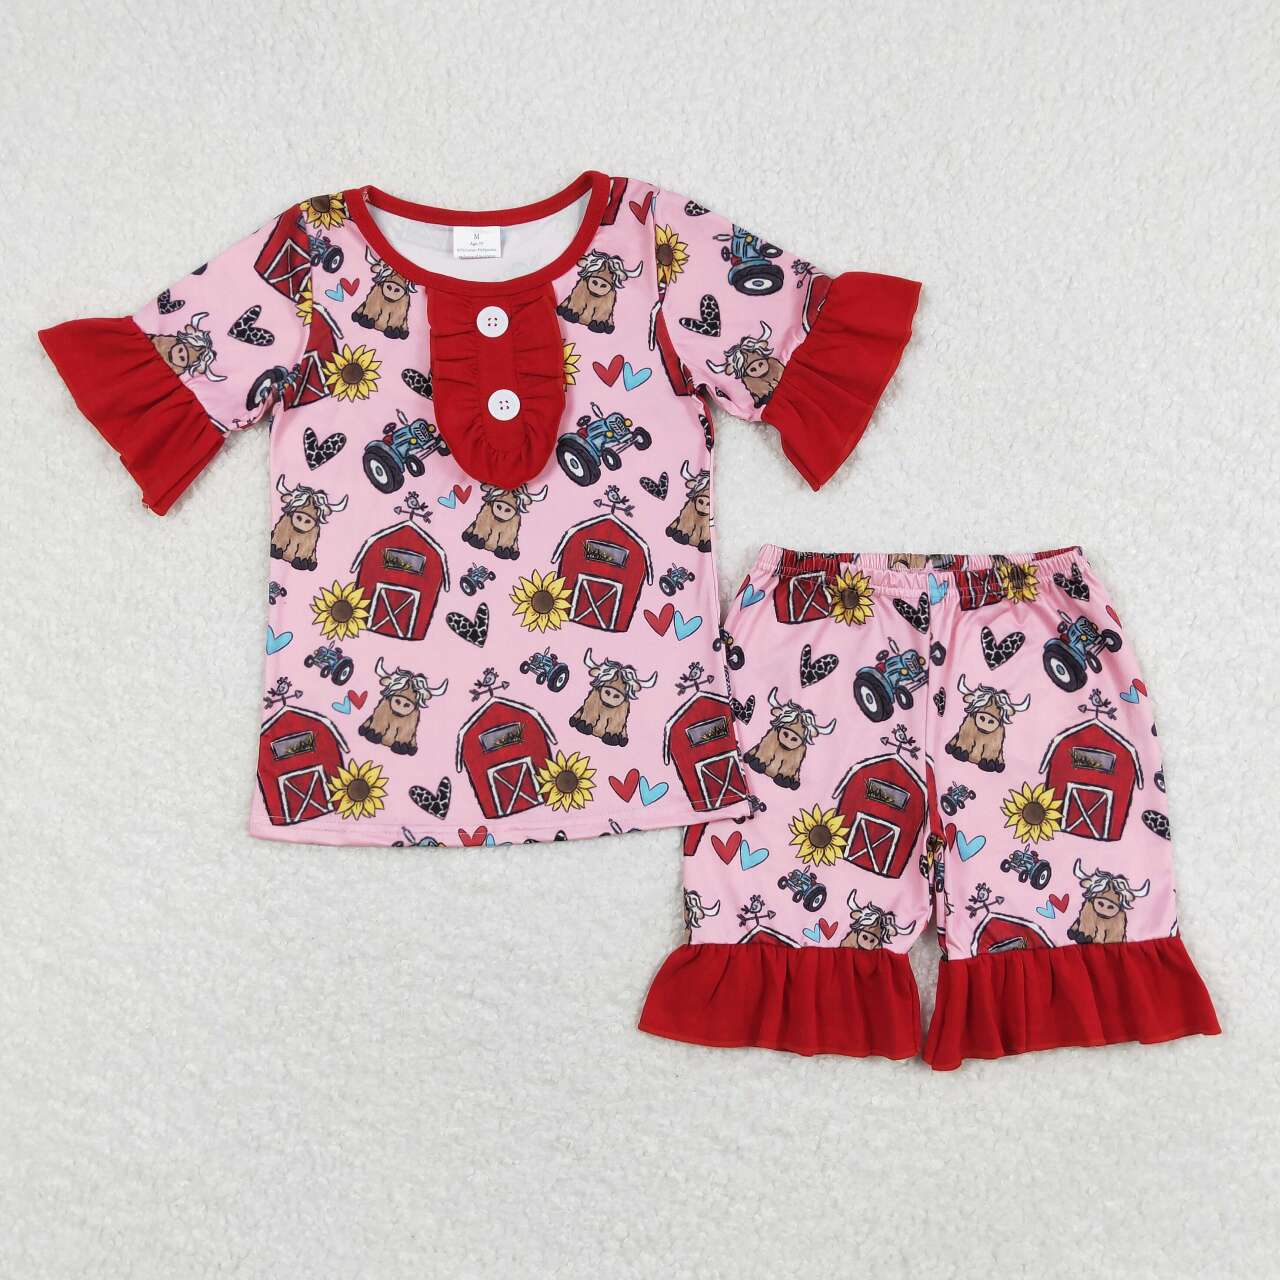 Farm Cow Sunflowers Print Sisters Summer Matching Clothes